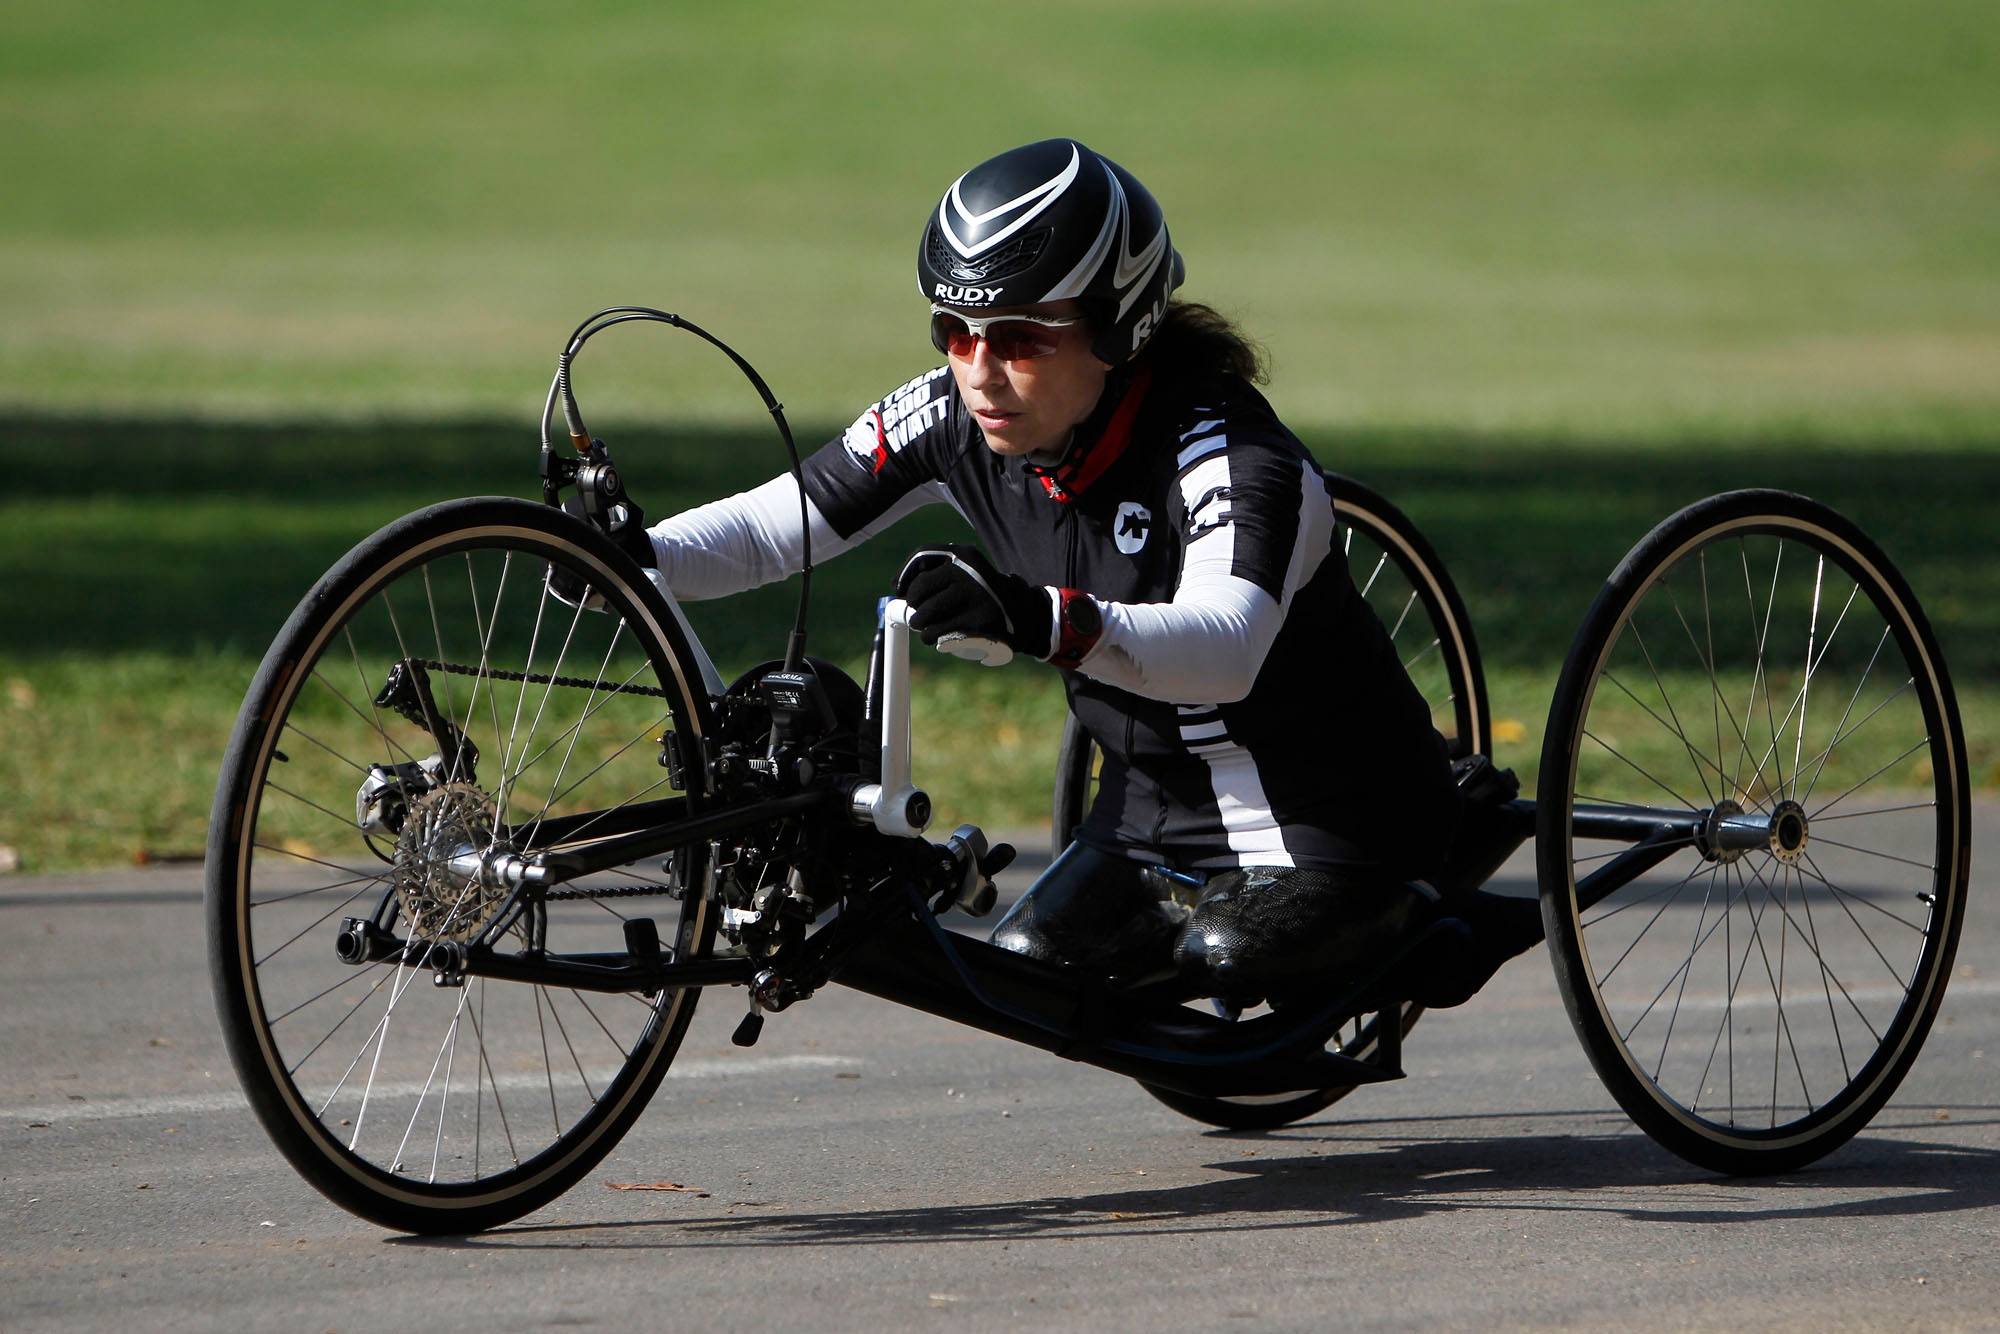 Israeli Paralympic handcyclist Pascale Bercovitch